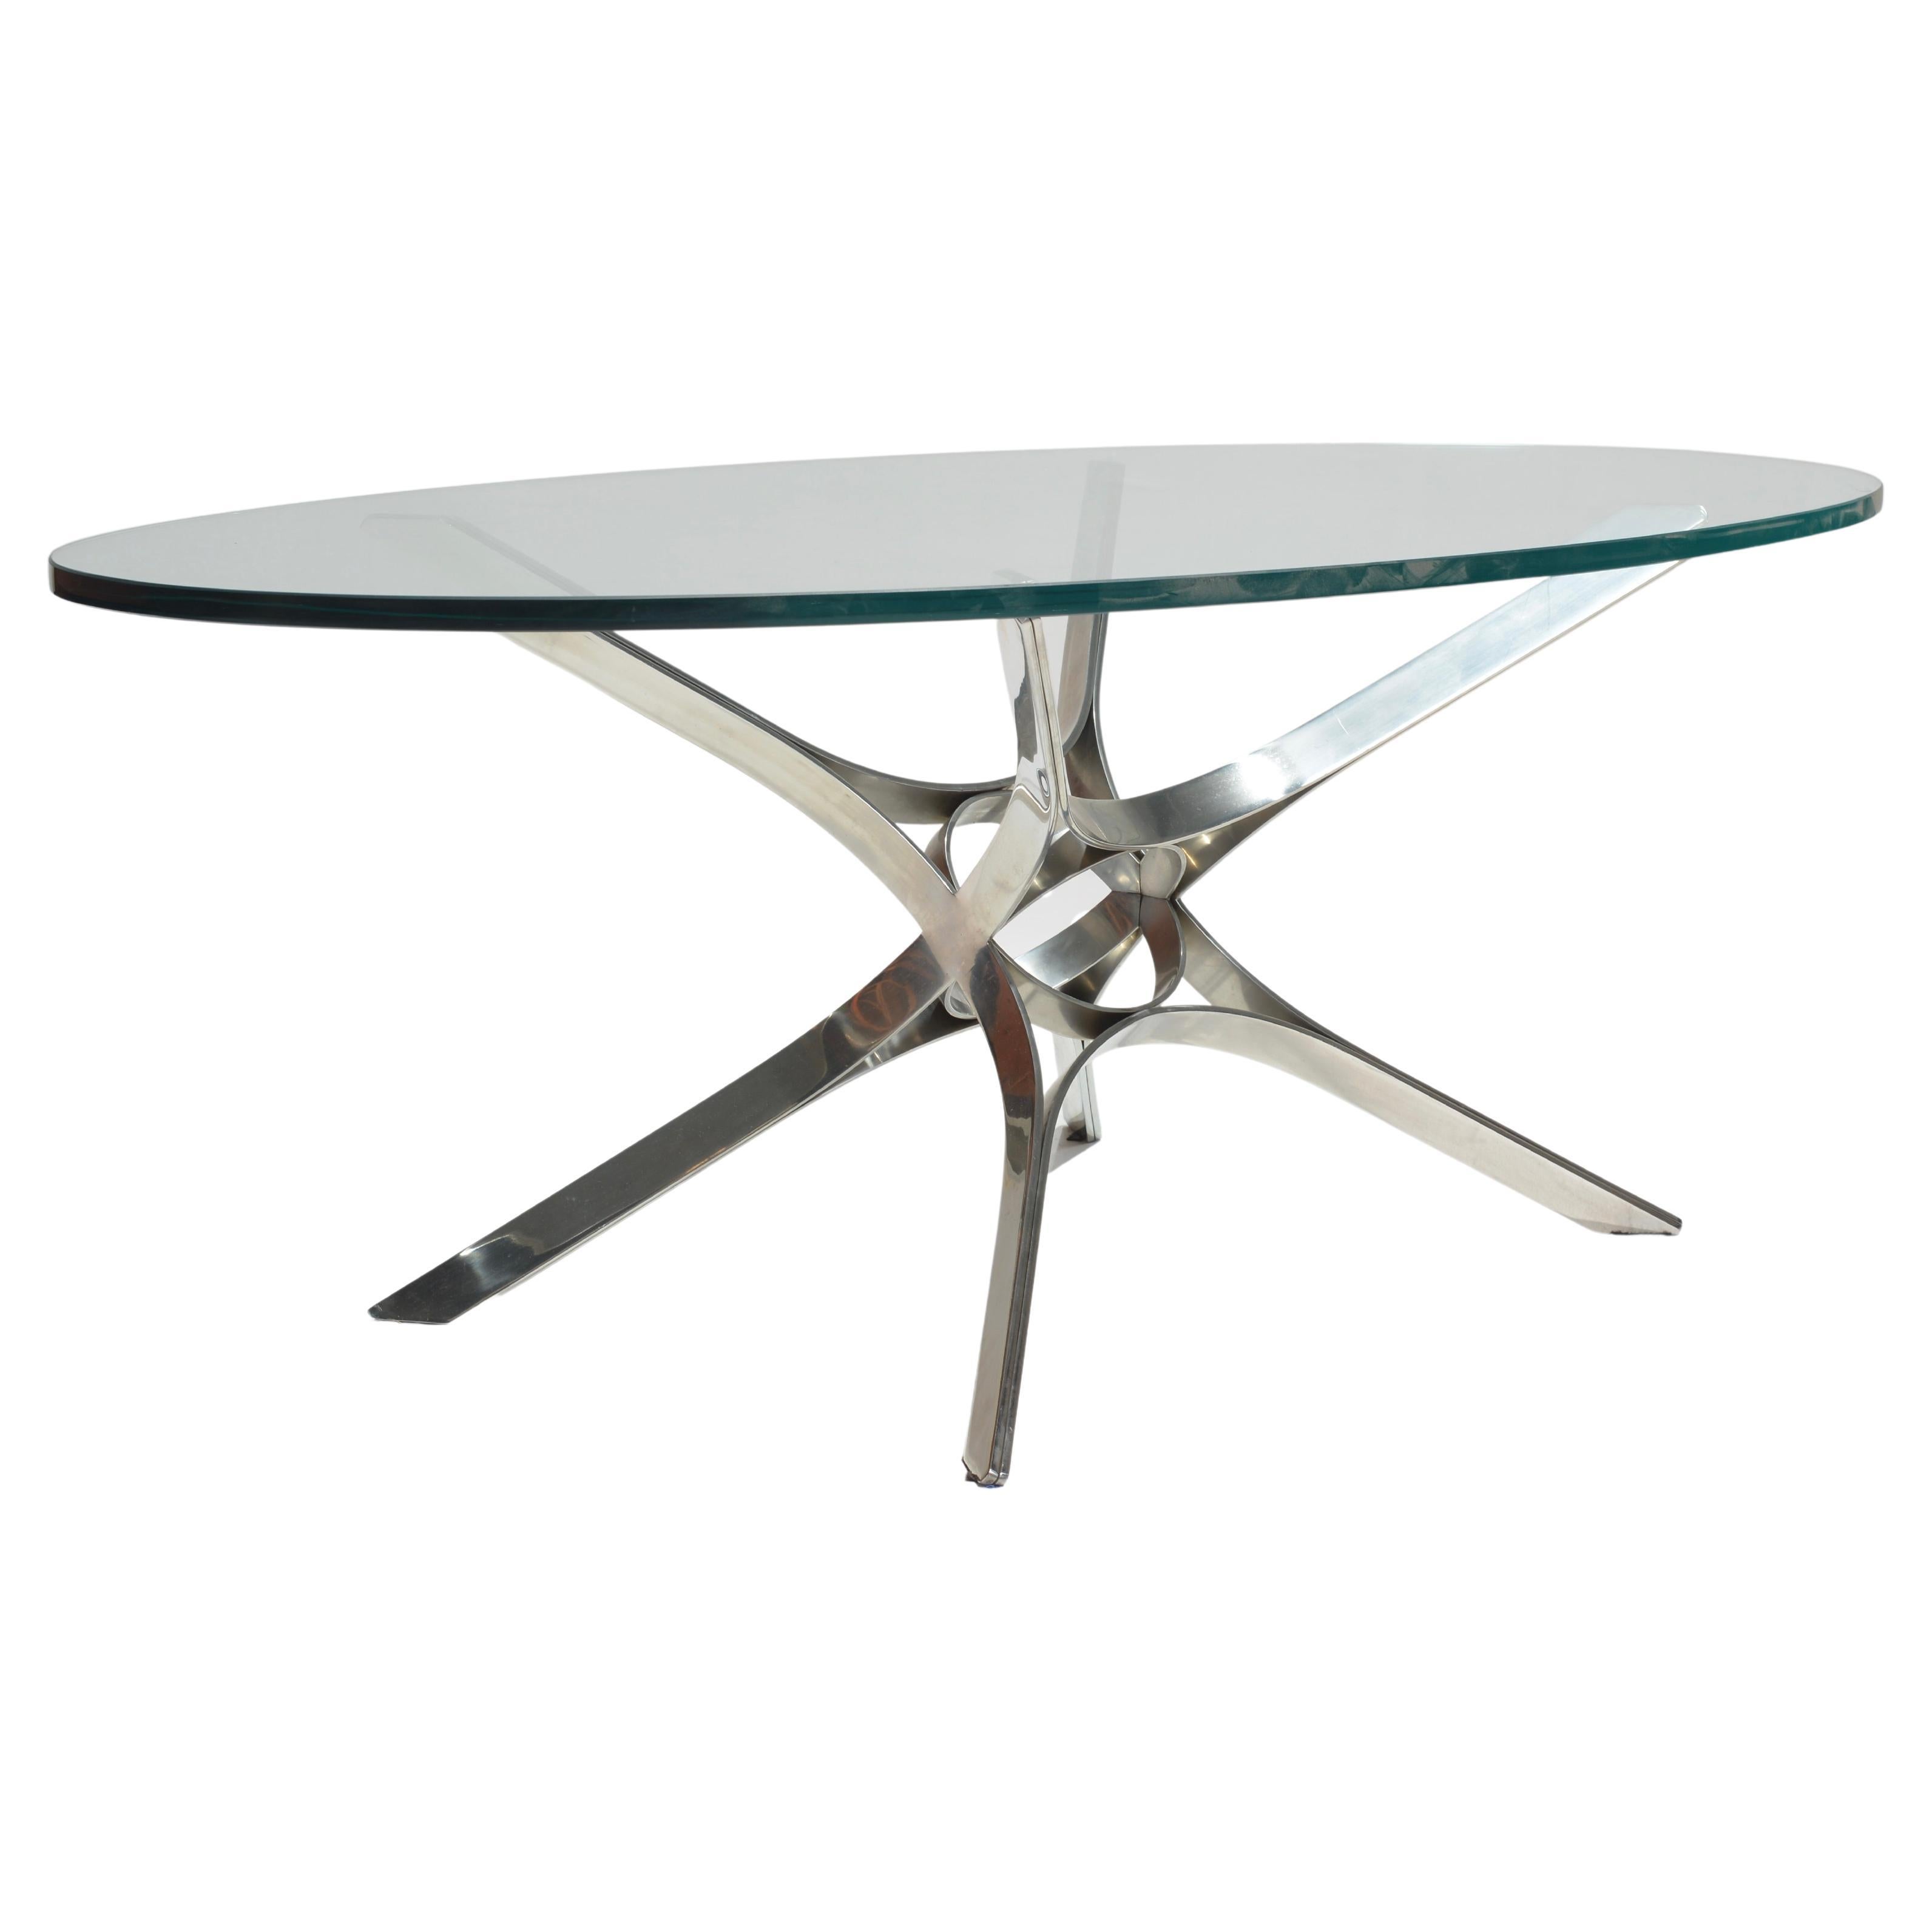 Sculptural Stainless Steel and Glass Coffee Table by Roger Sprunger for Dunbar For Sale